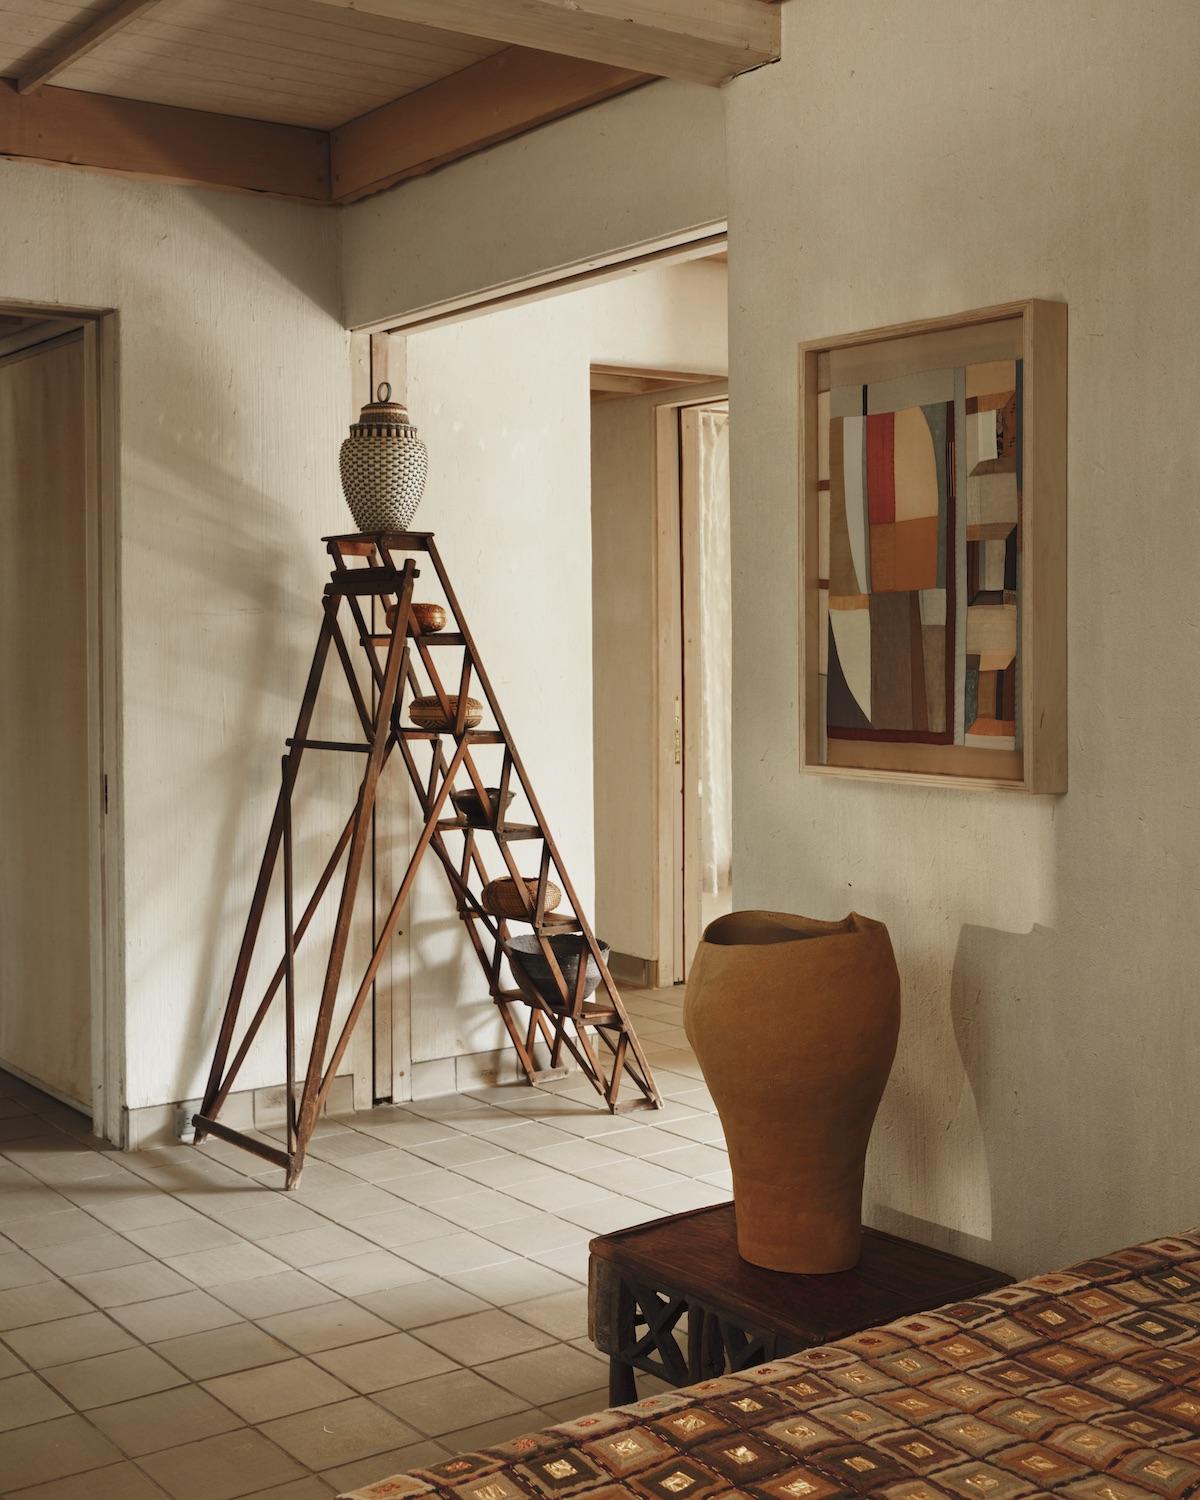 A Summer Arrangement: Object & Thing at LongHouse. LongHouse, East Hampton, New York. Photo by Adrian Gaut. Works pictured: [back wall]: ladder and baskets from the collection of LongHouse with a work by Jeremy Frey on the top rung; [wall] Kiva Motnyk, Light Reflections (2023); [side table] Ludmilla Balkis, Monochrome No. 04, (2021); [bed] Jack Lenor Larsen, Magnum (1970).